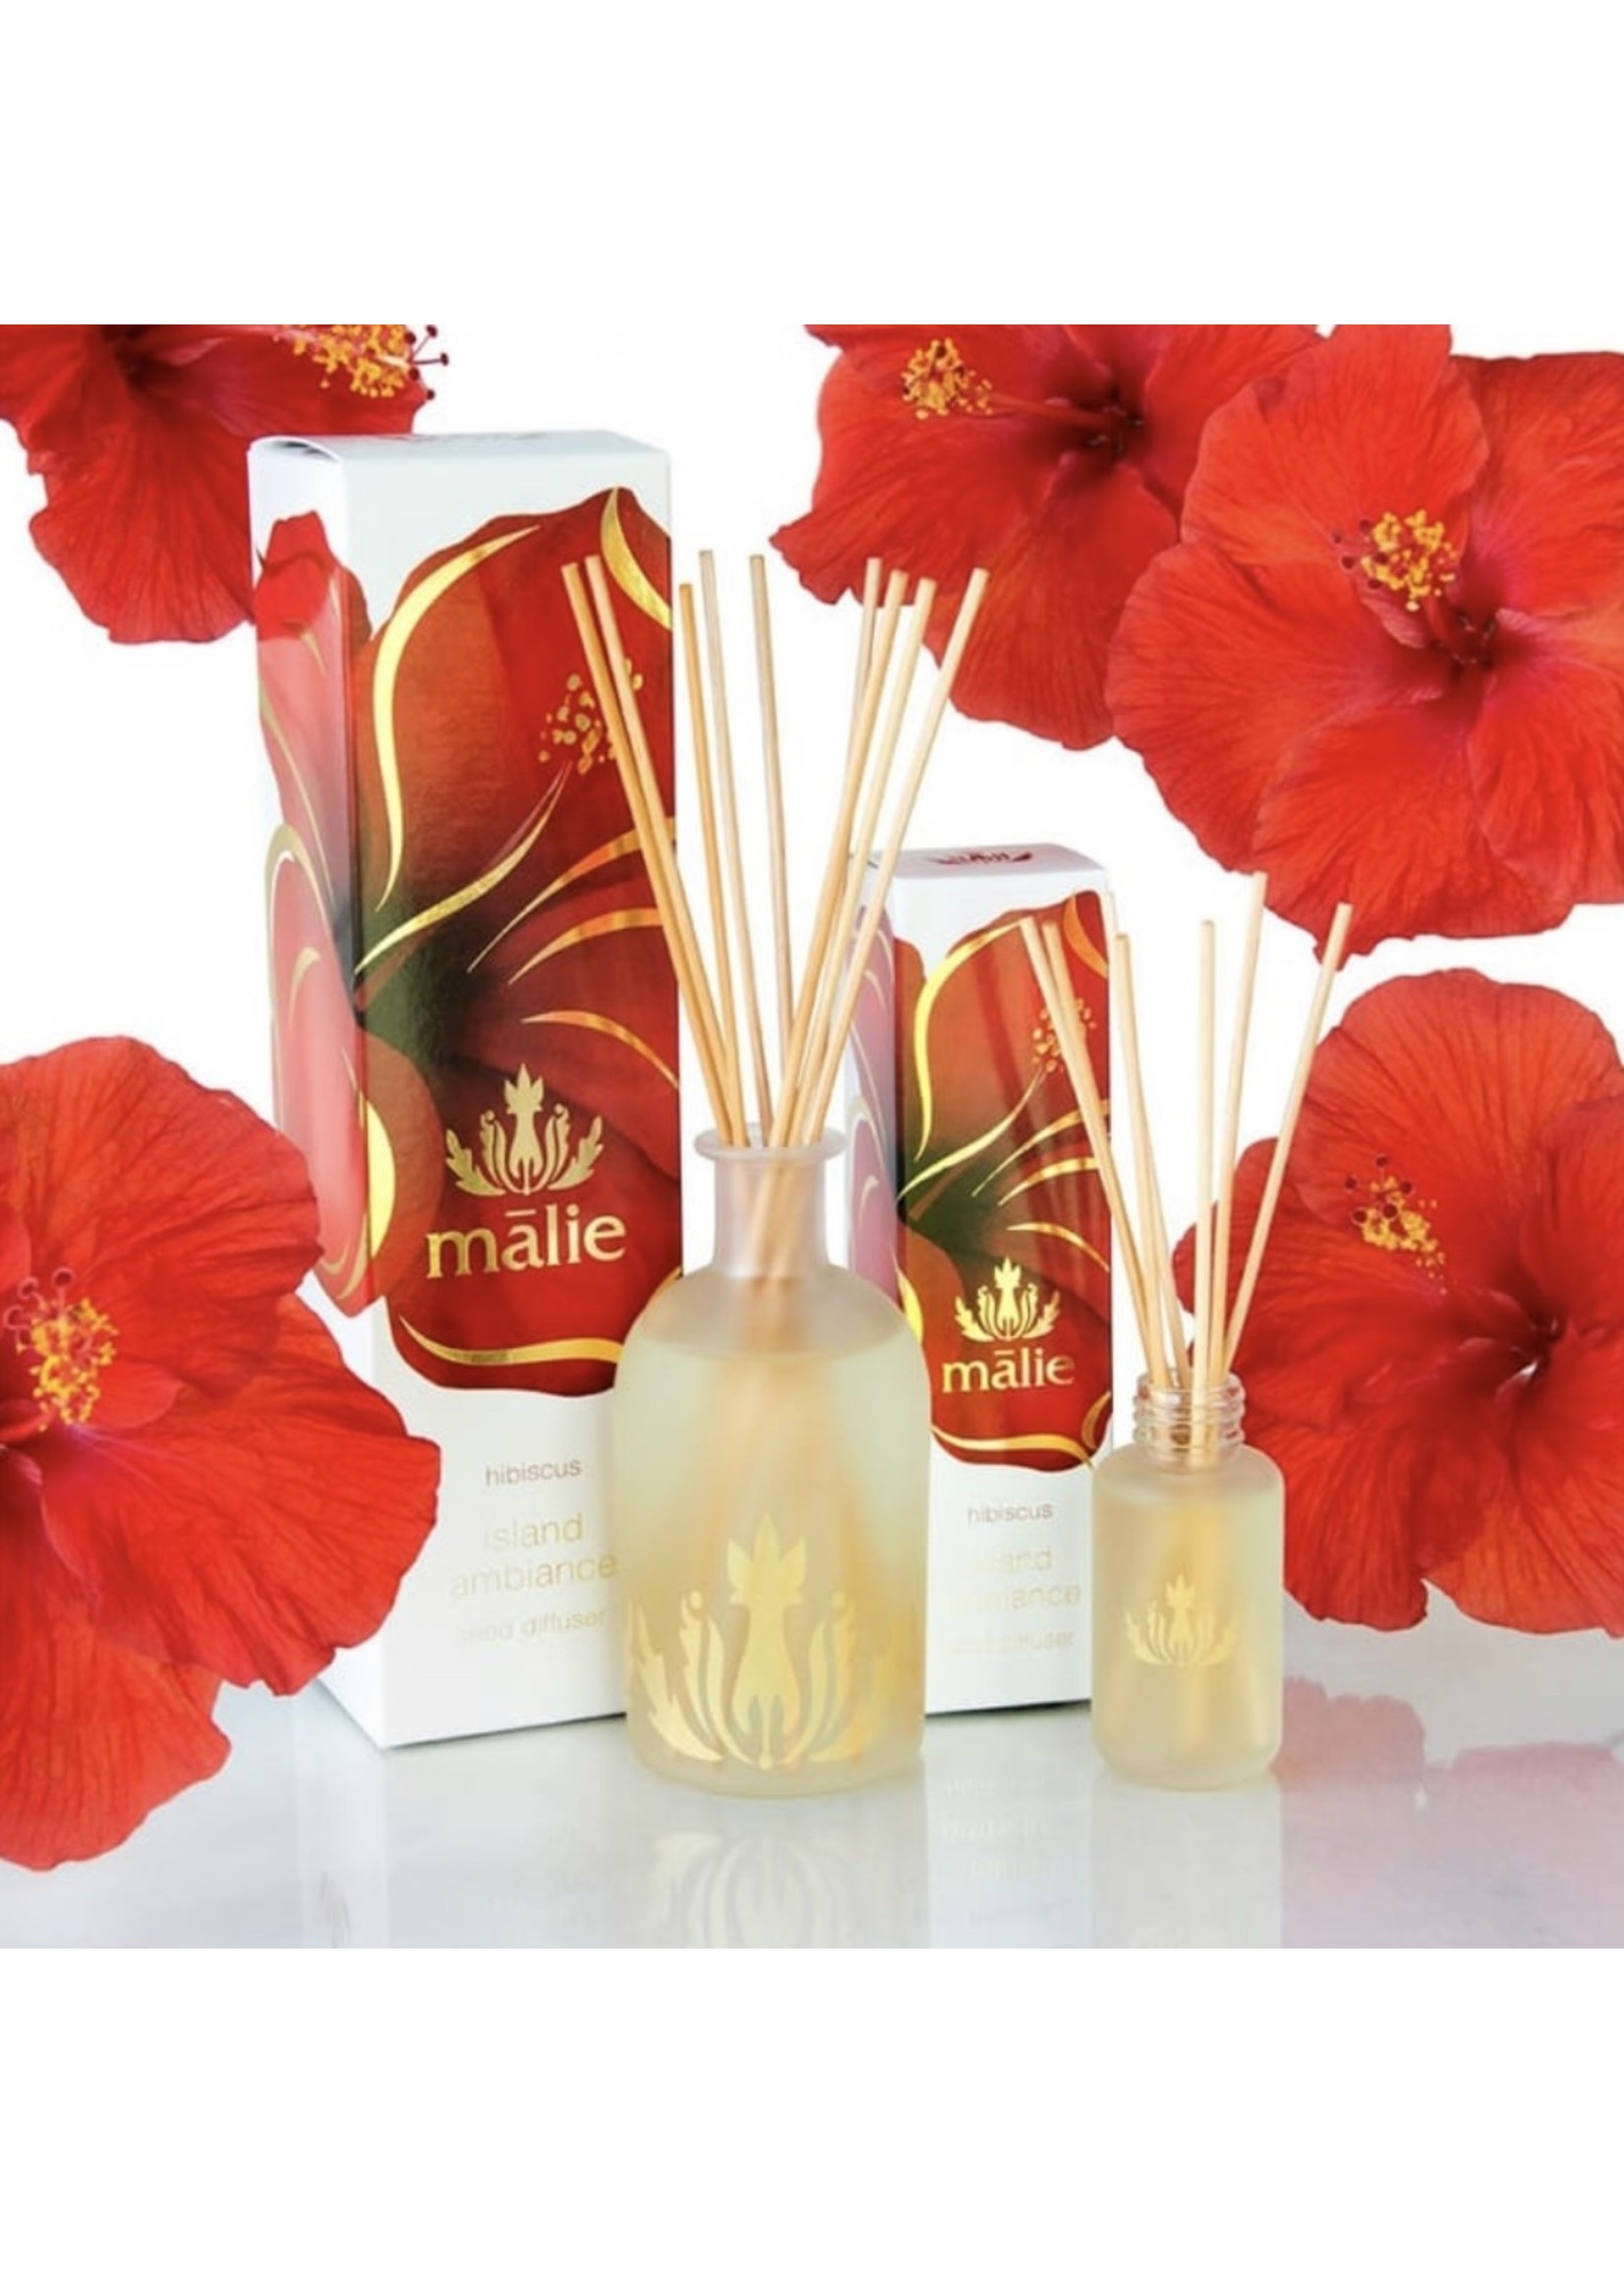 Malie Malie - Ambiance Reed Diffuser